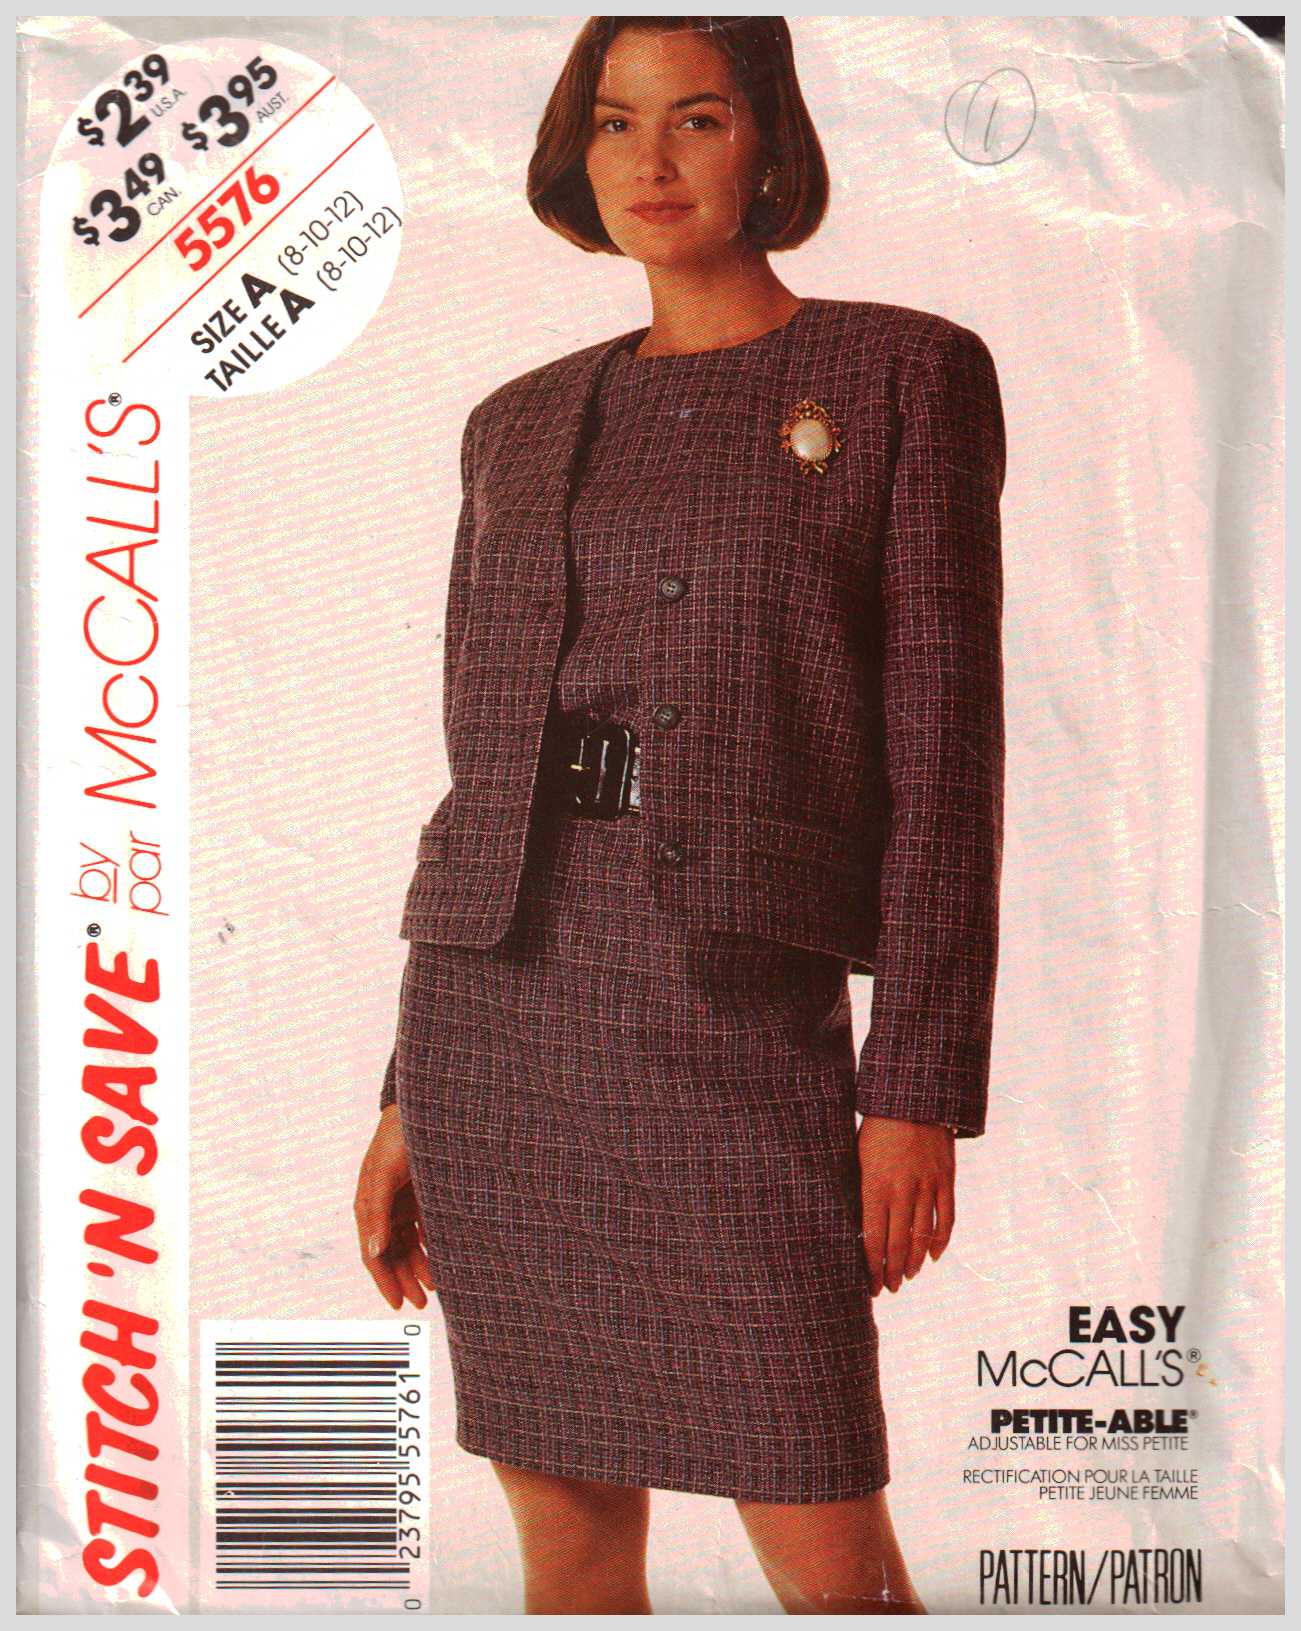 McCall's 5576 Unlined Jacket, Dress Size: A 8-10-12 Used Sewing Pattern